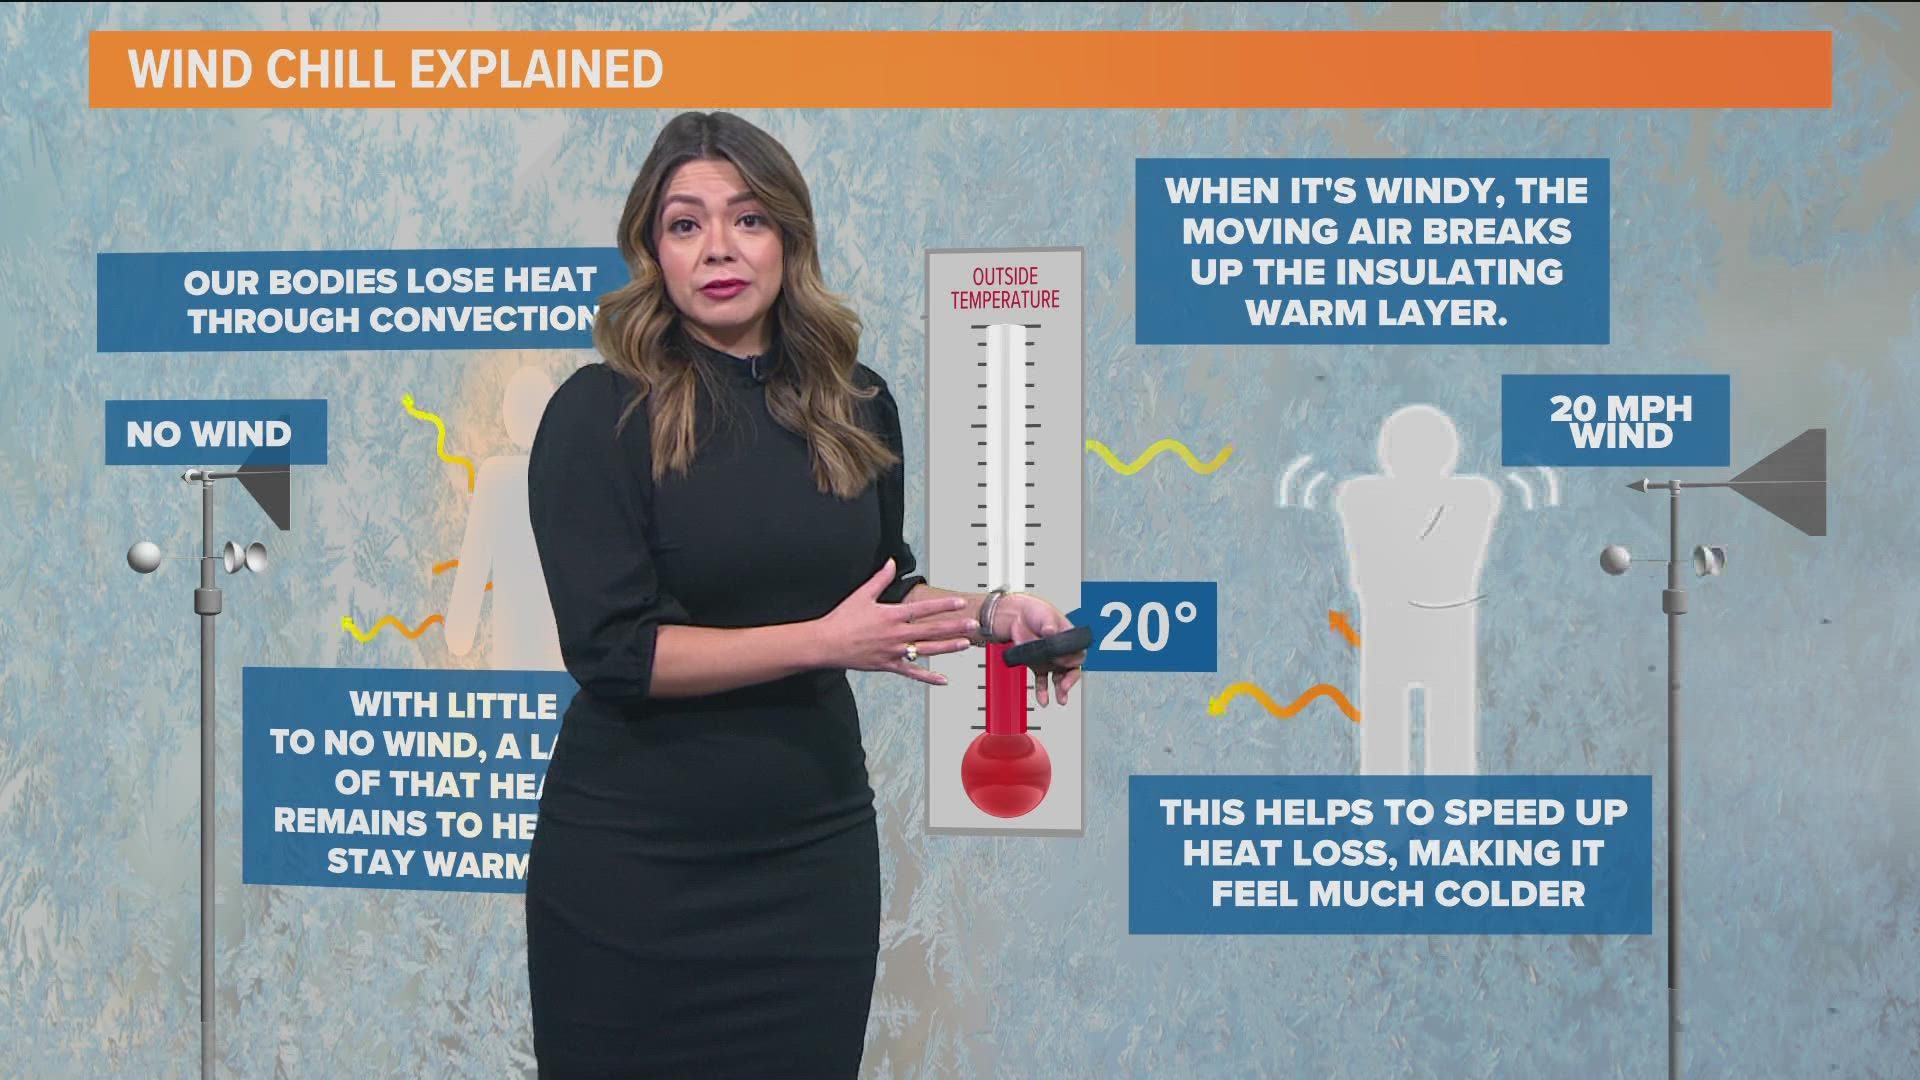 Meteorologist Mariel Ruiz describes the wind chill what why it is important to note.